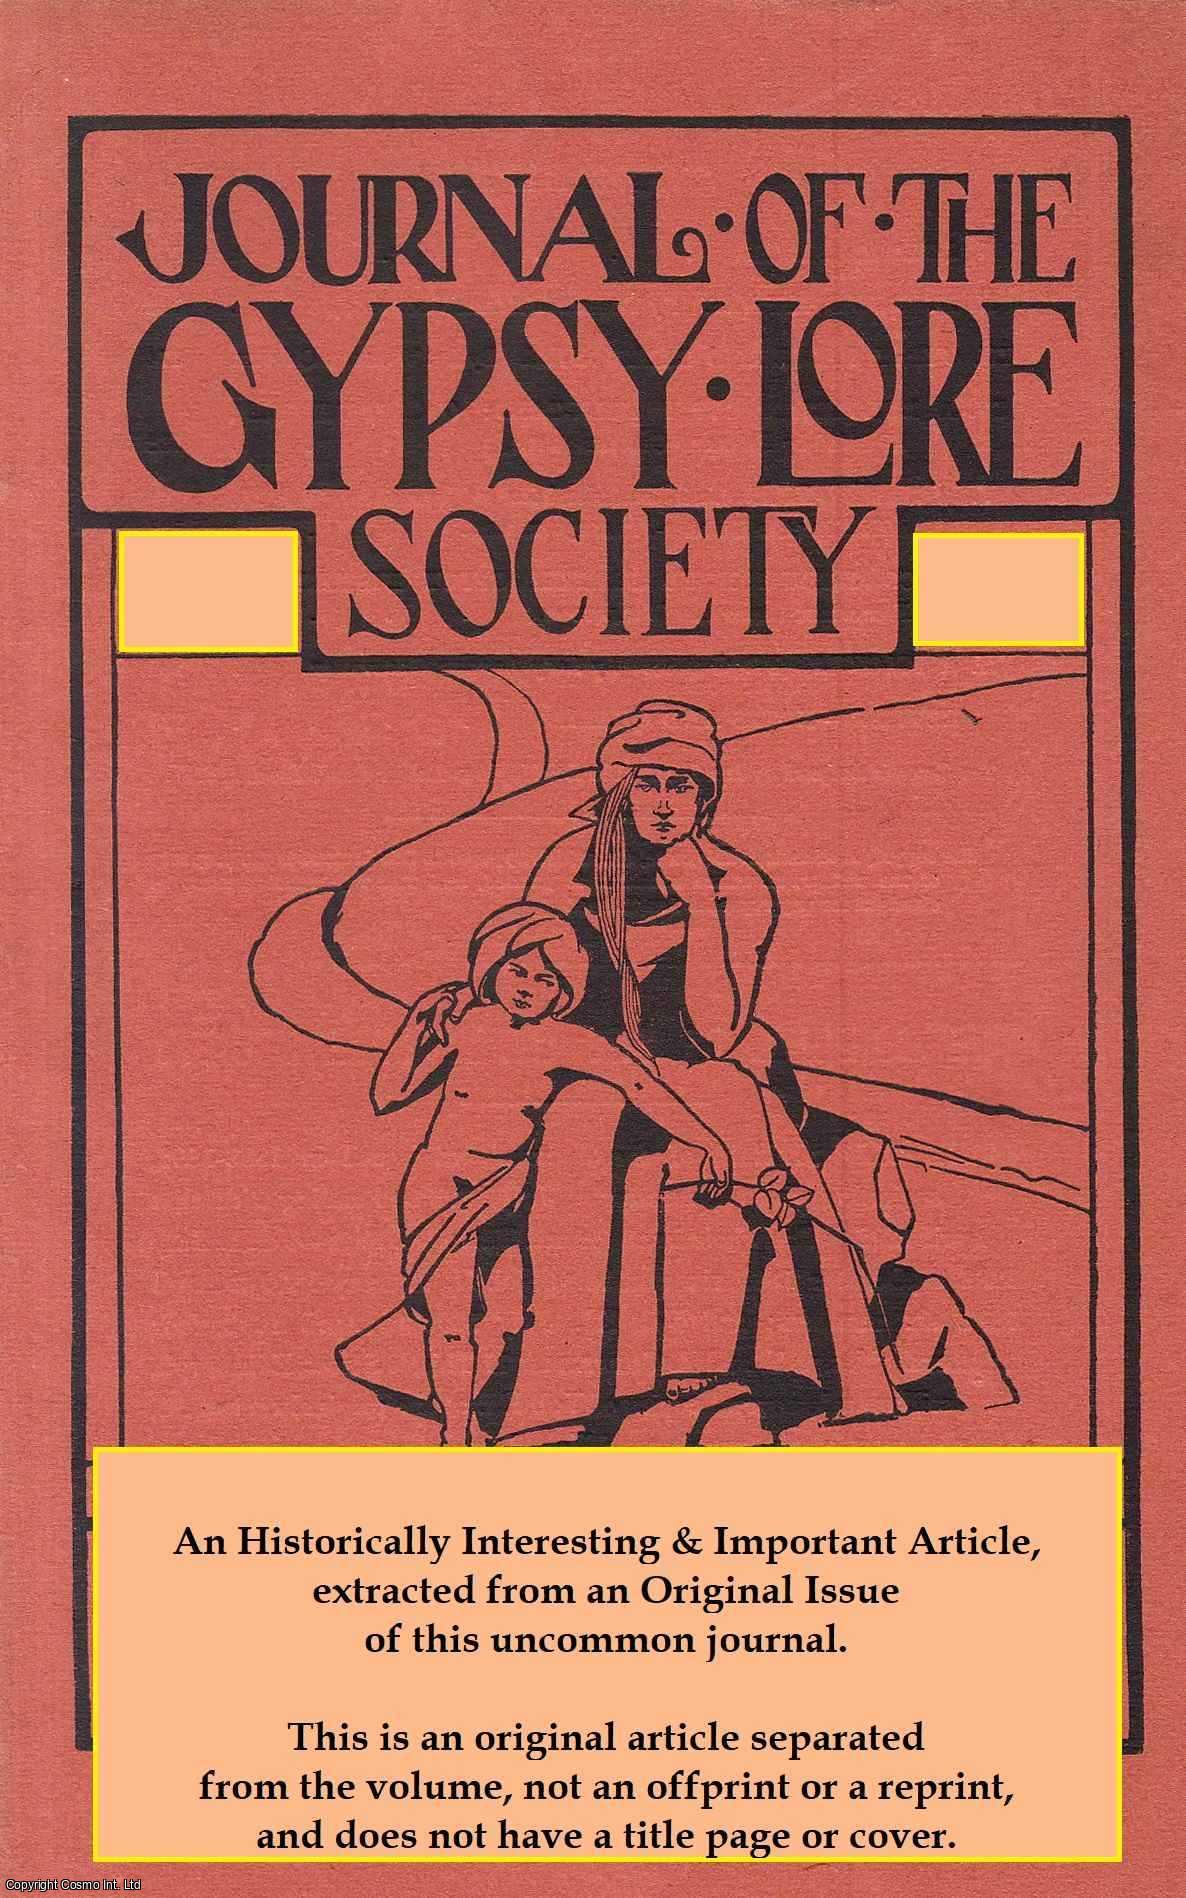 B.J. Gilliat-Smith - A Drindari Folk-Tale. An uncommon original article from the Journal of the Gypsy Lore Society, 1931.